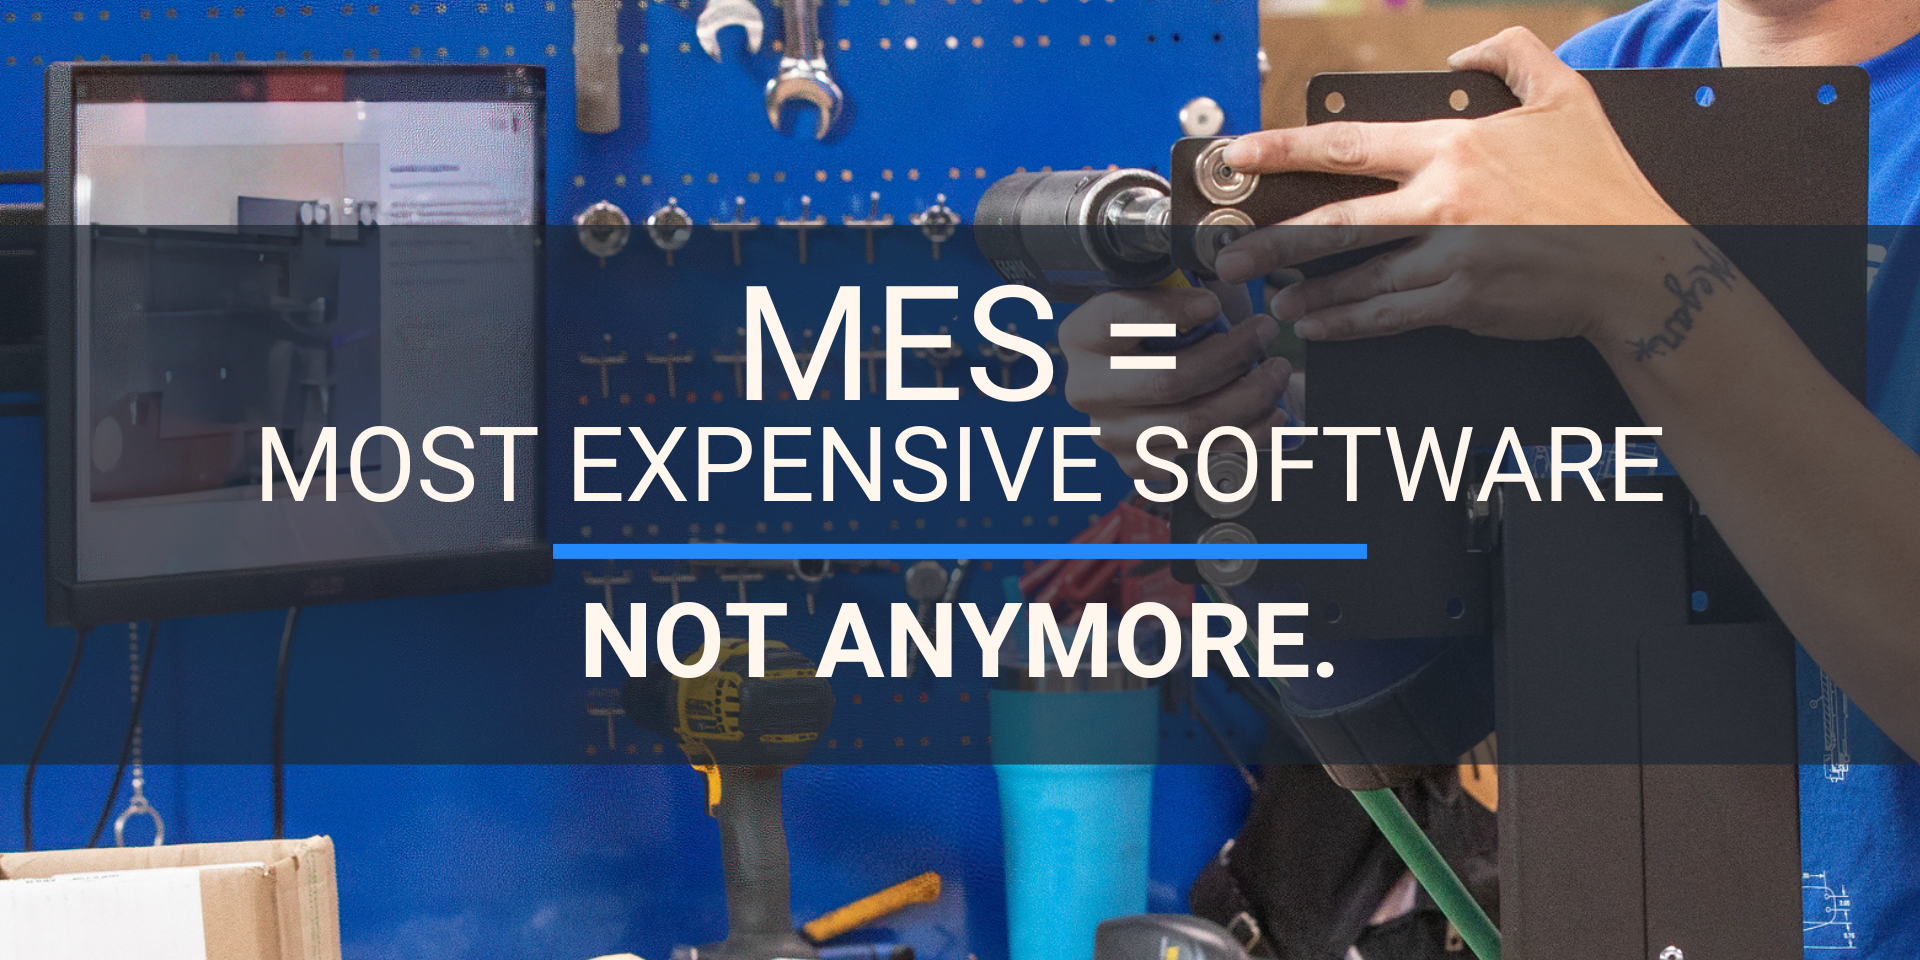 Pico MES is an affordable manufacturing execution system for the mid-market